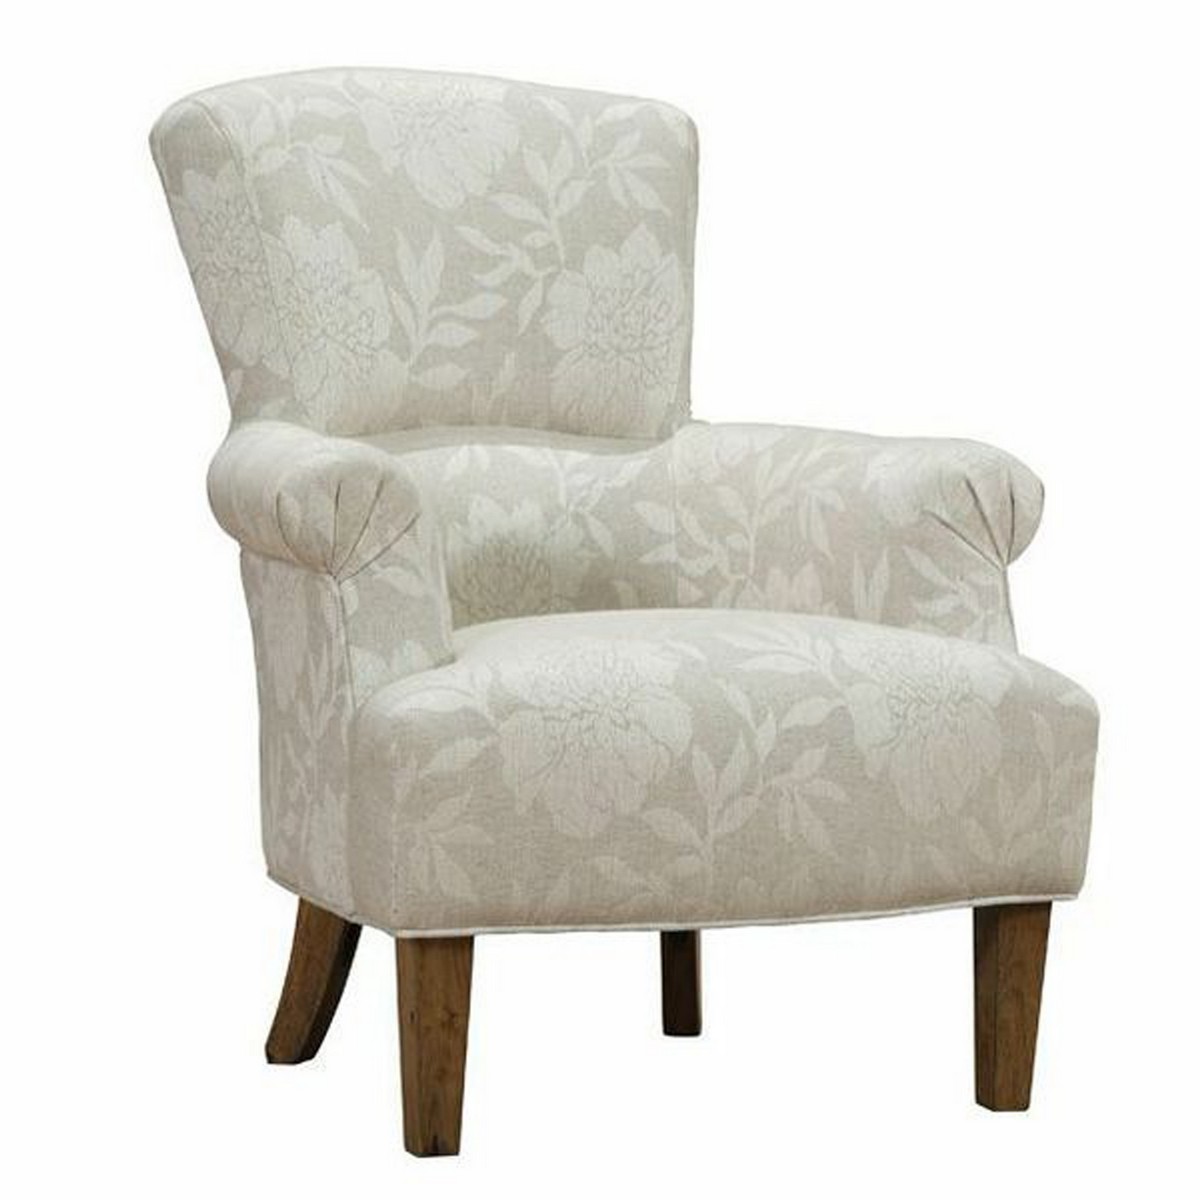 Armen Living Barstow Accent Chair In Cream Flower Fabric